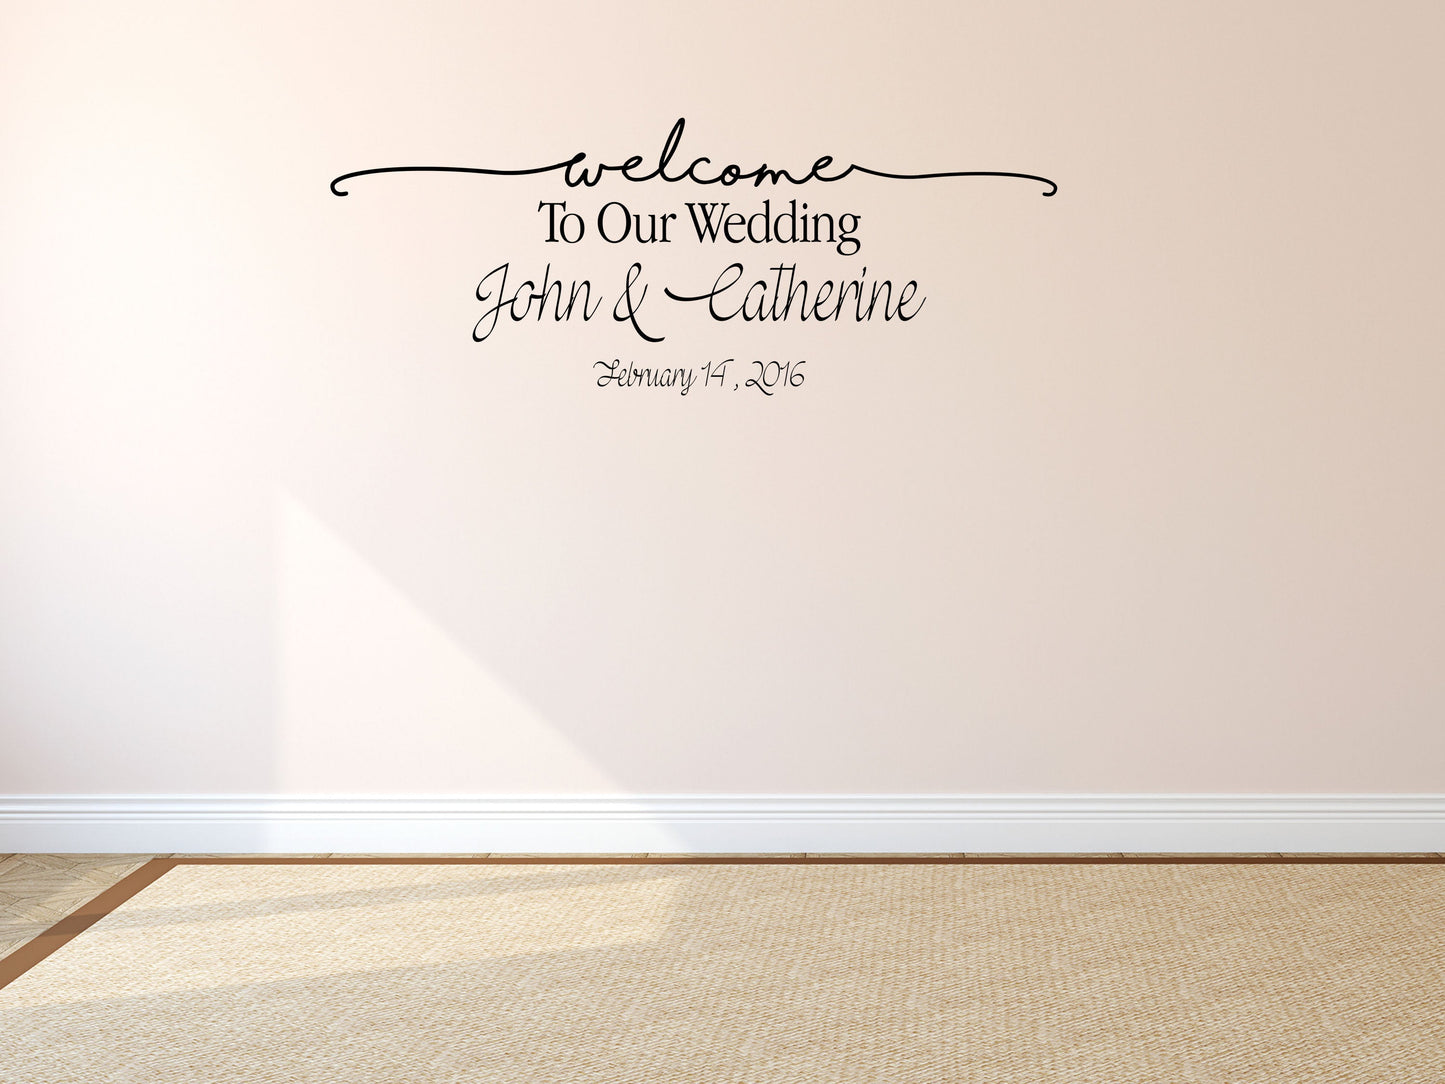 Welcome To Our Wedding Custom Name Vinyl Wall Decal Wedding Signs Custom Wedding Decal Dance Floor Decal Custom Wedding Sign Vinyl Wall Decal Title Done 